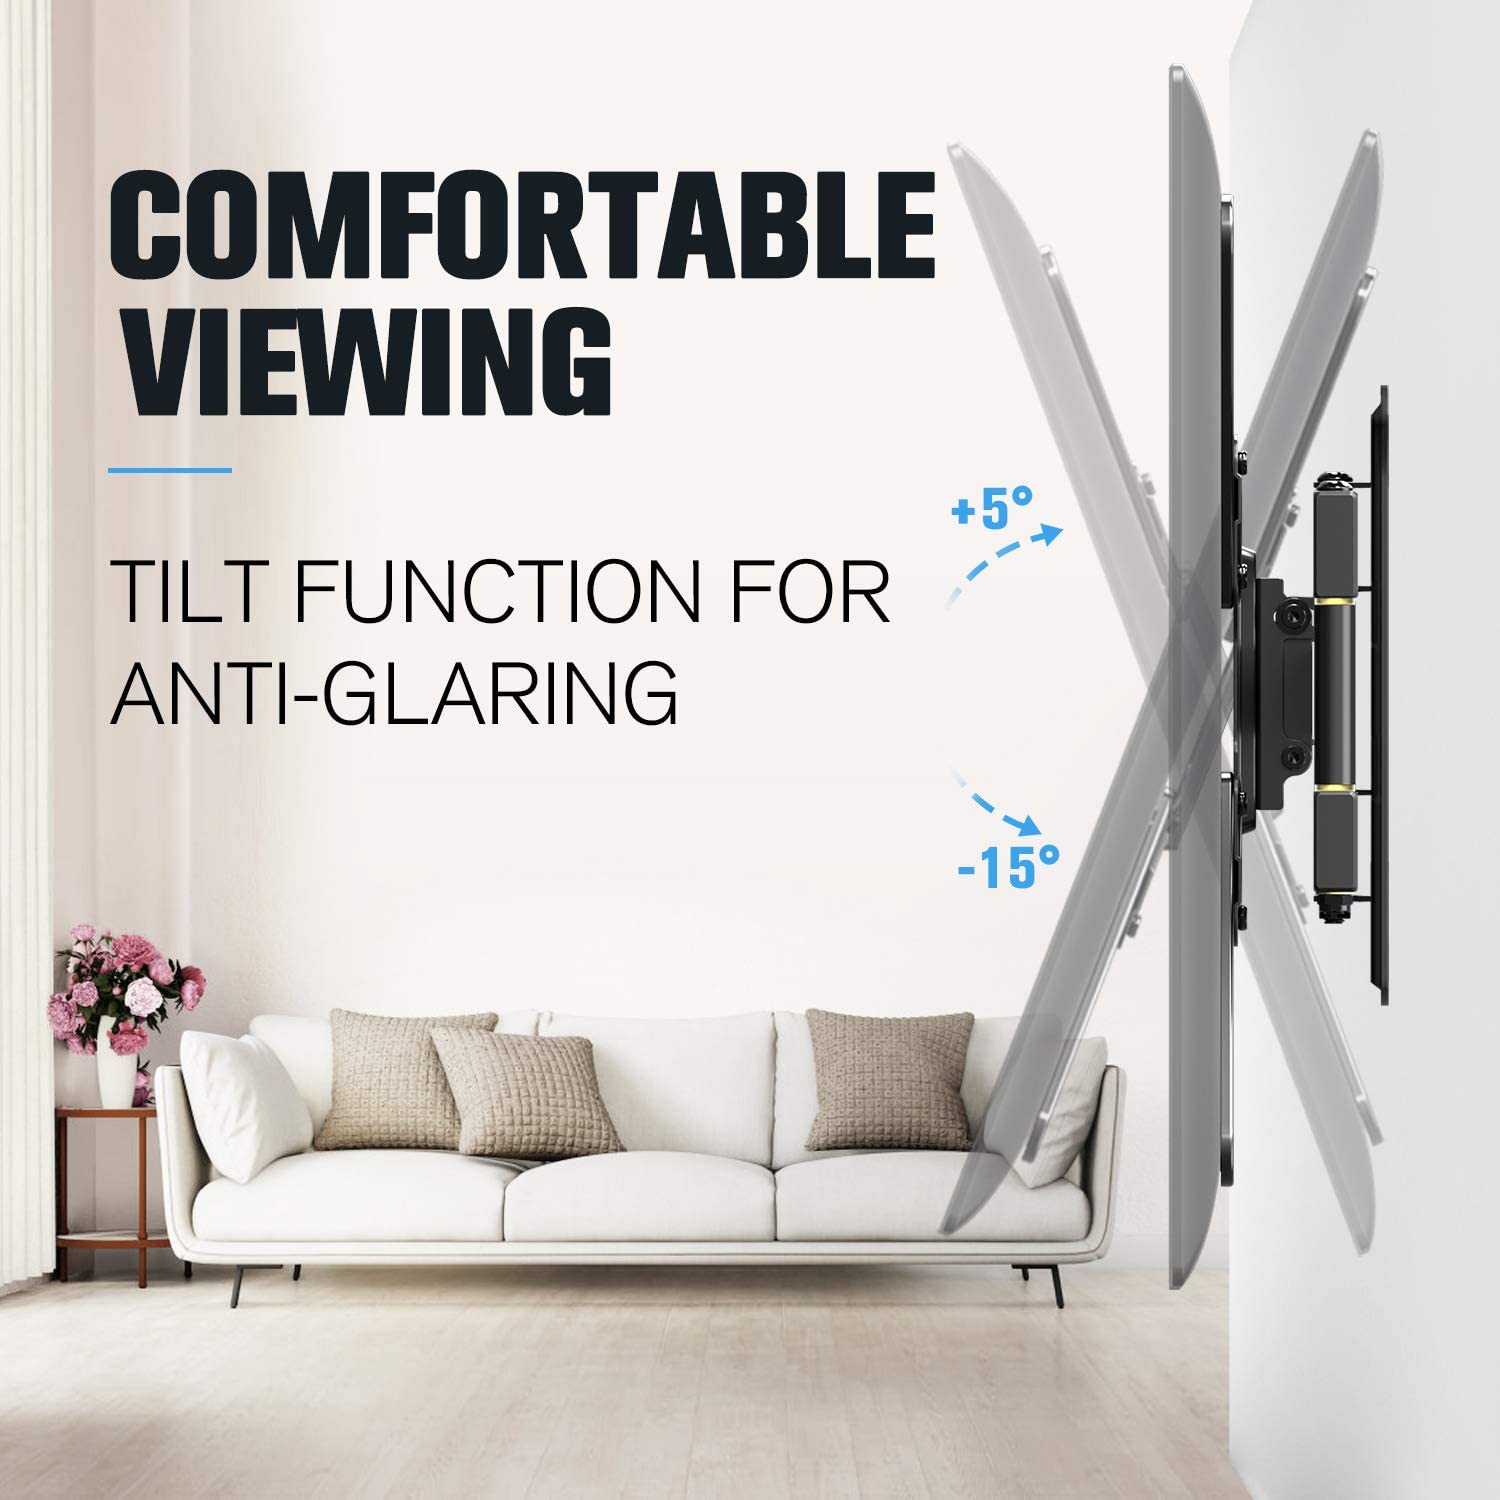 tilt the tv up and down for anti-glaring